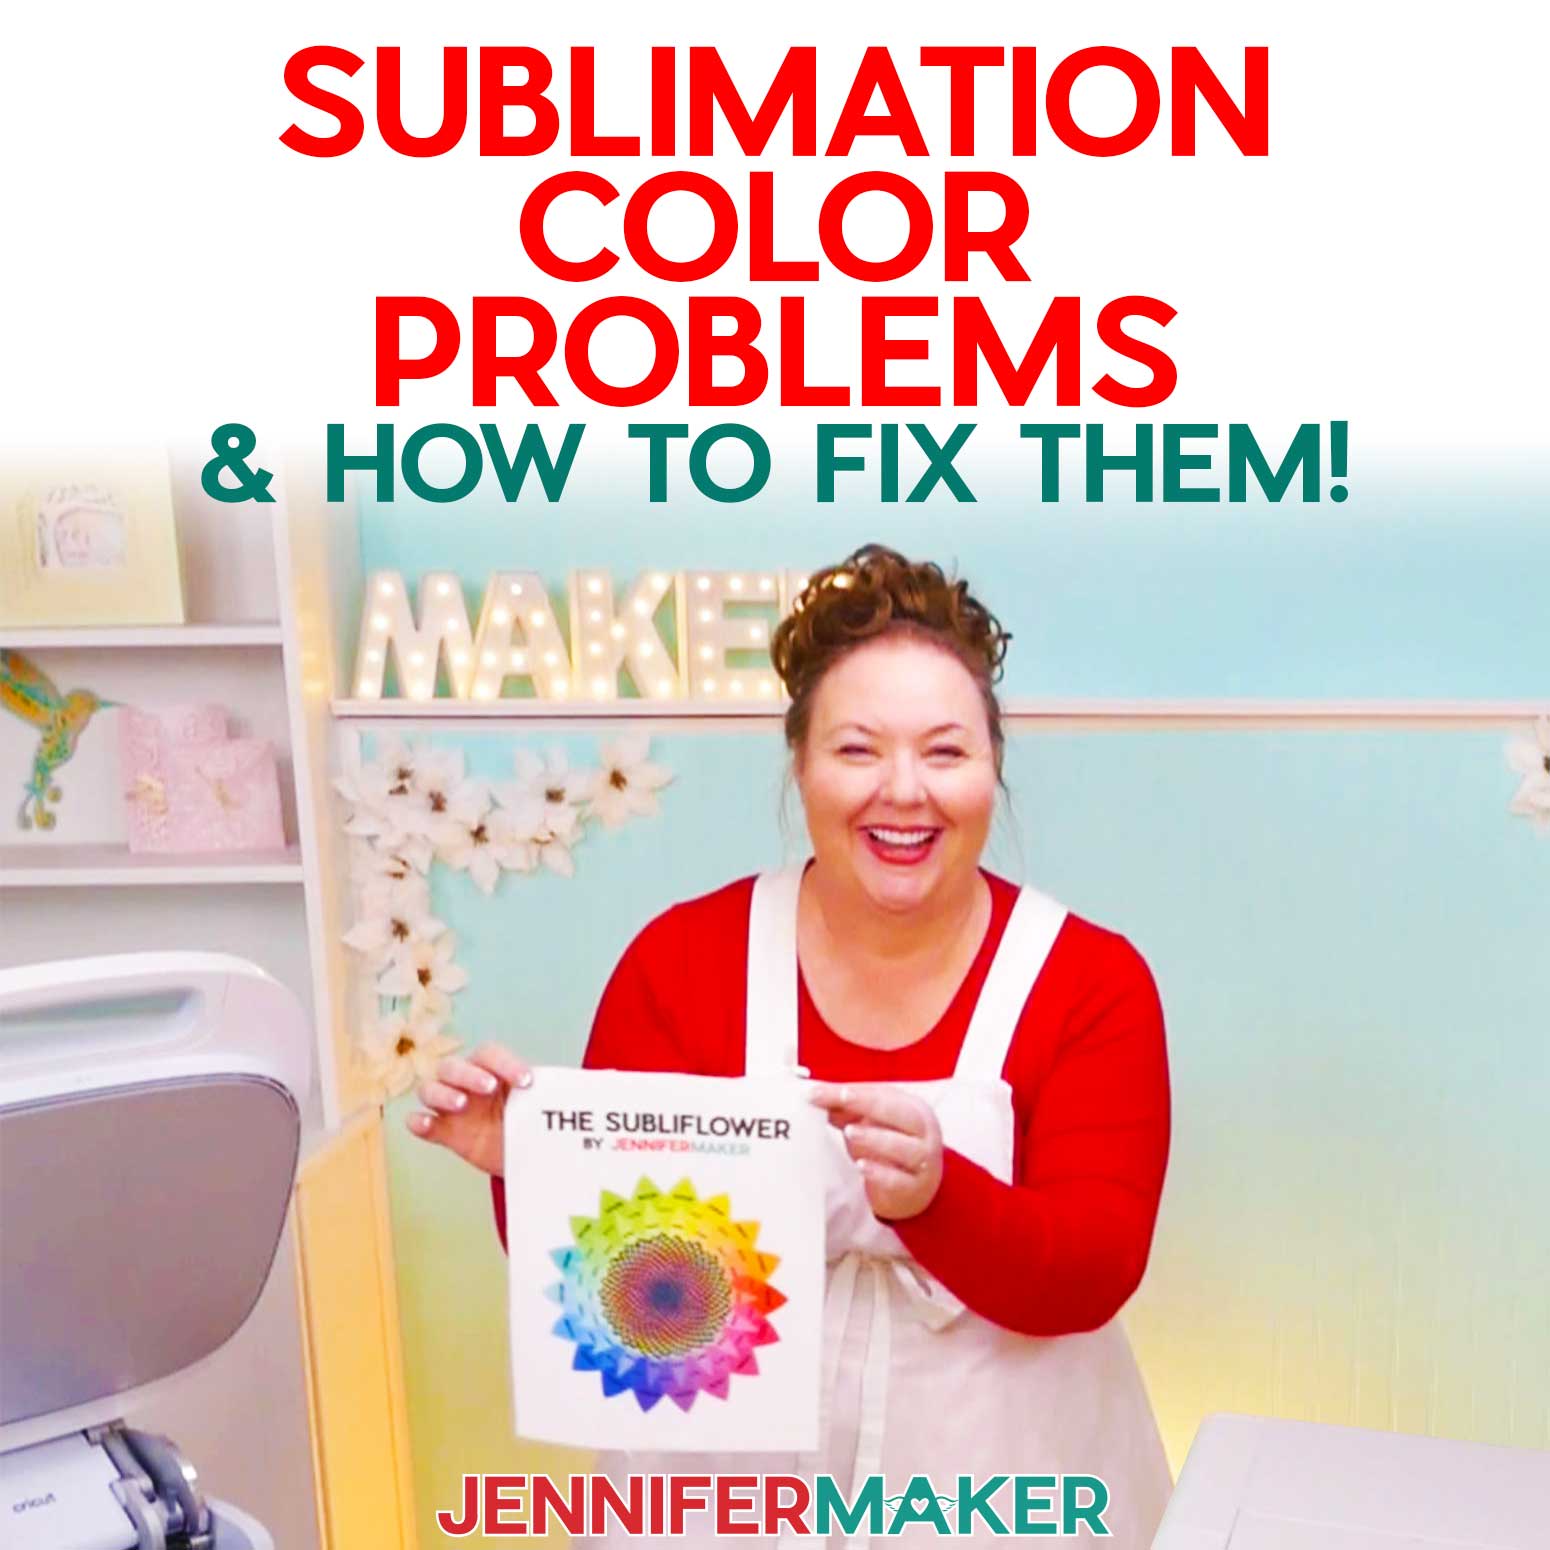 25+ Sublimation Color Problems & How to Solve Them!